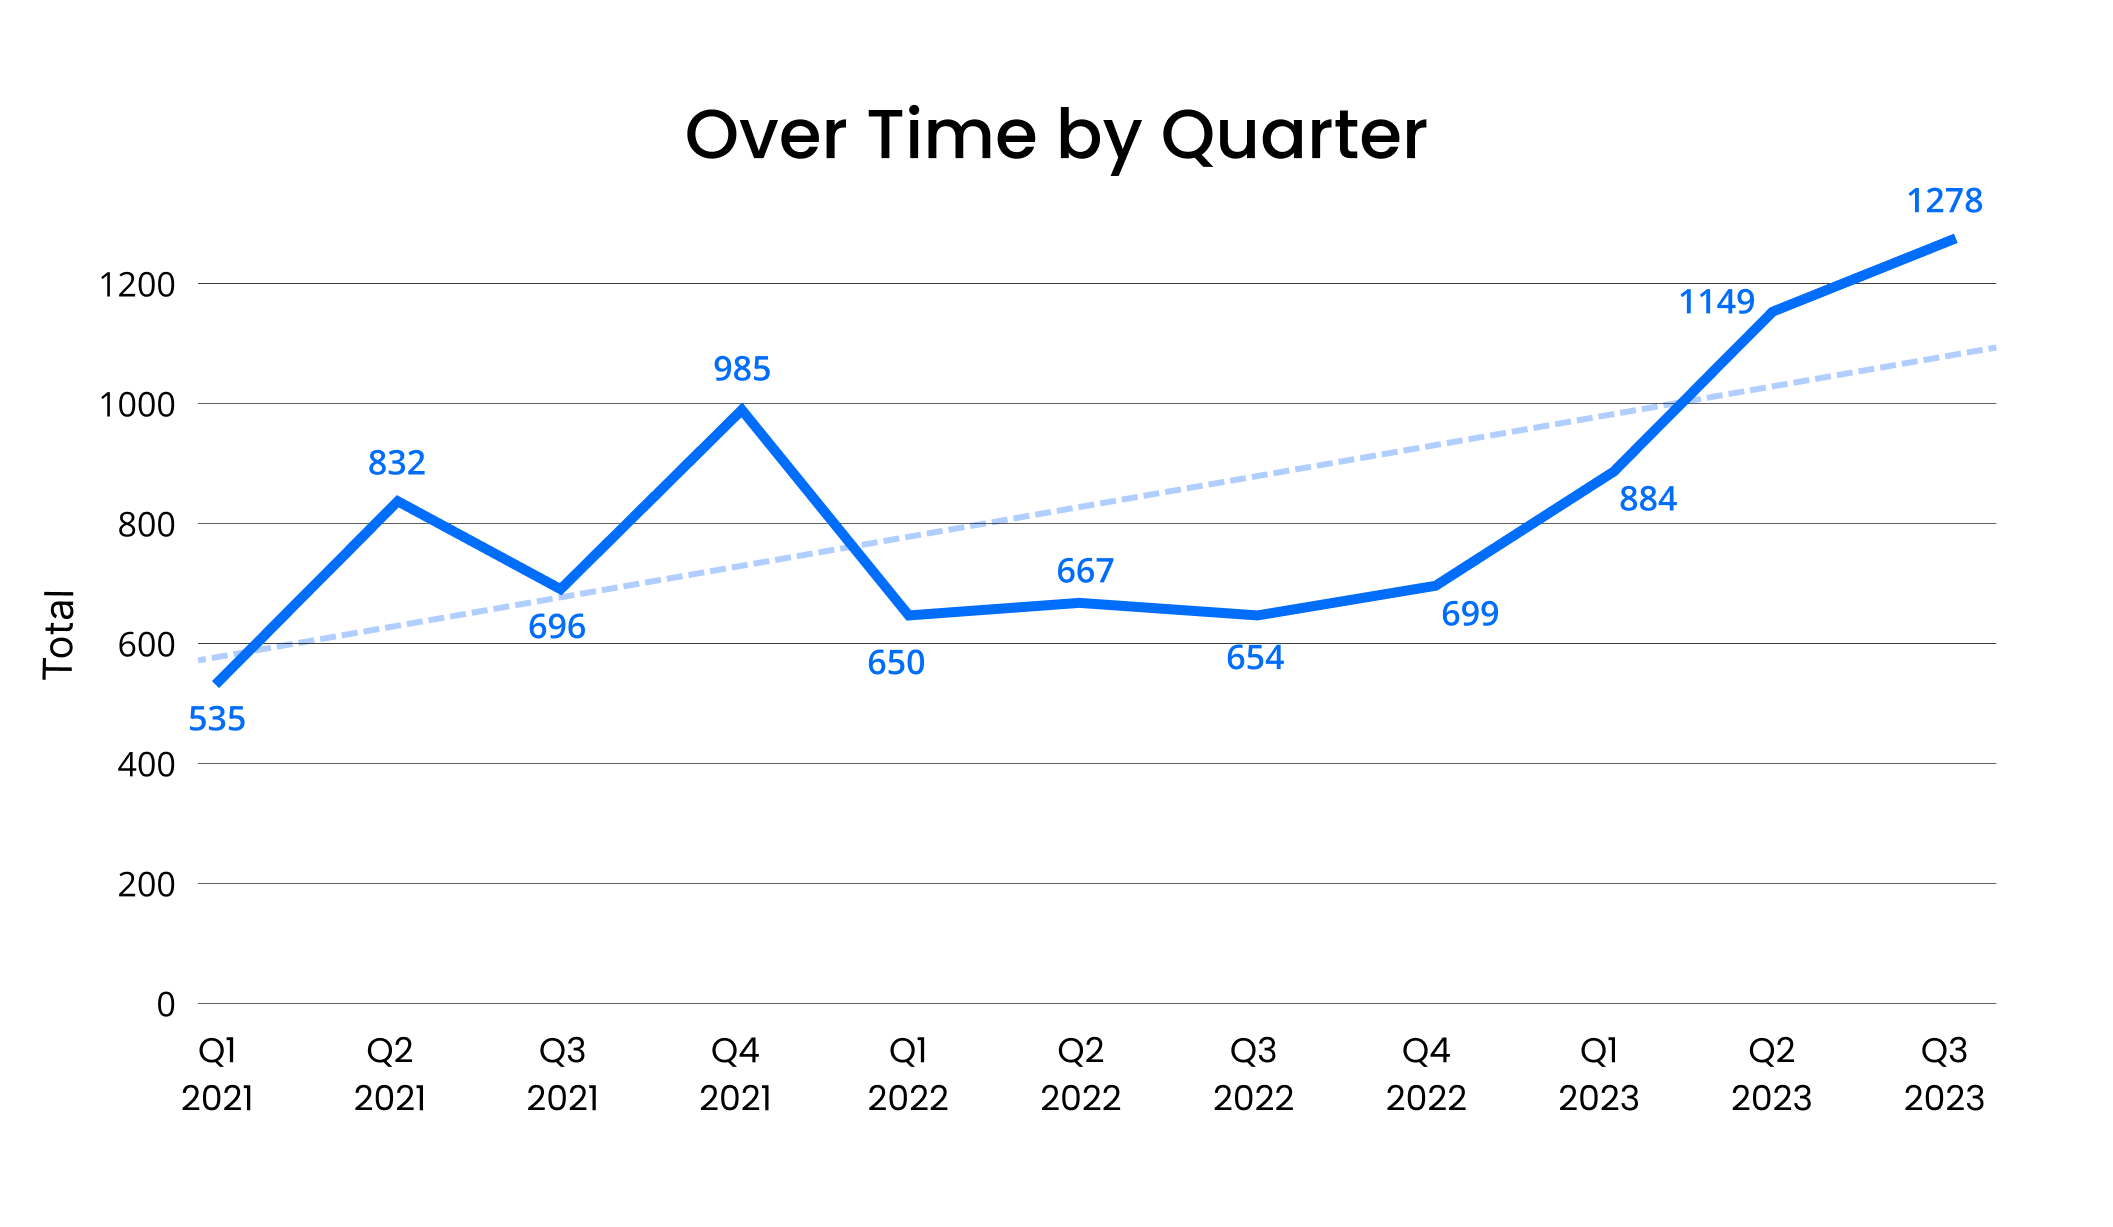 [LINE GRAPH] Ransomware Attacks Over Time by Quarter from Q1 2021 - Q3 2023 